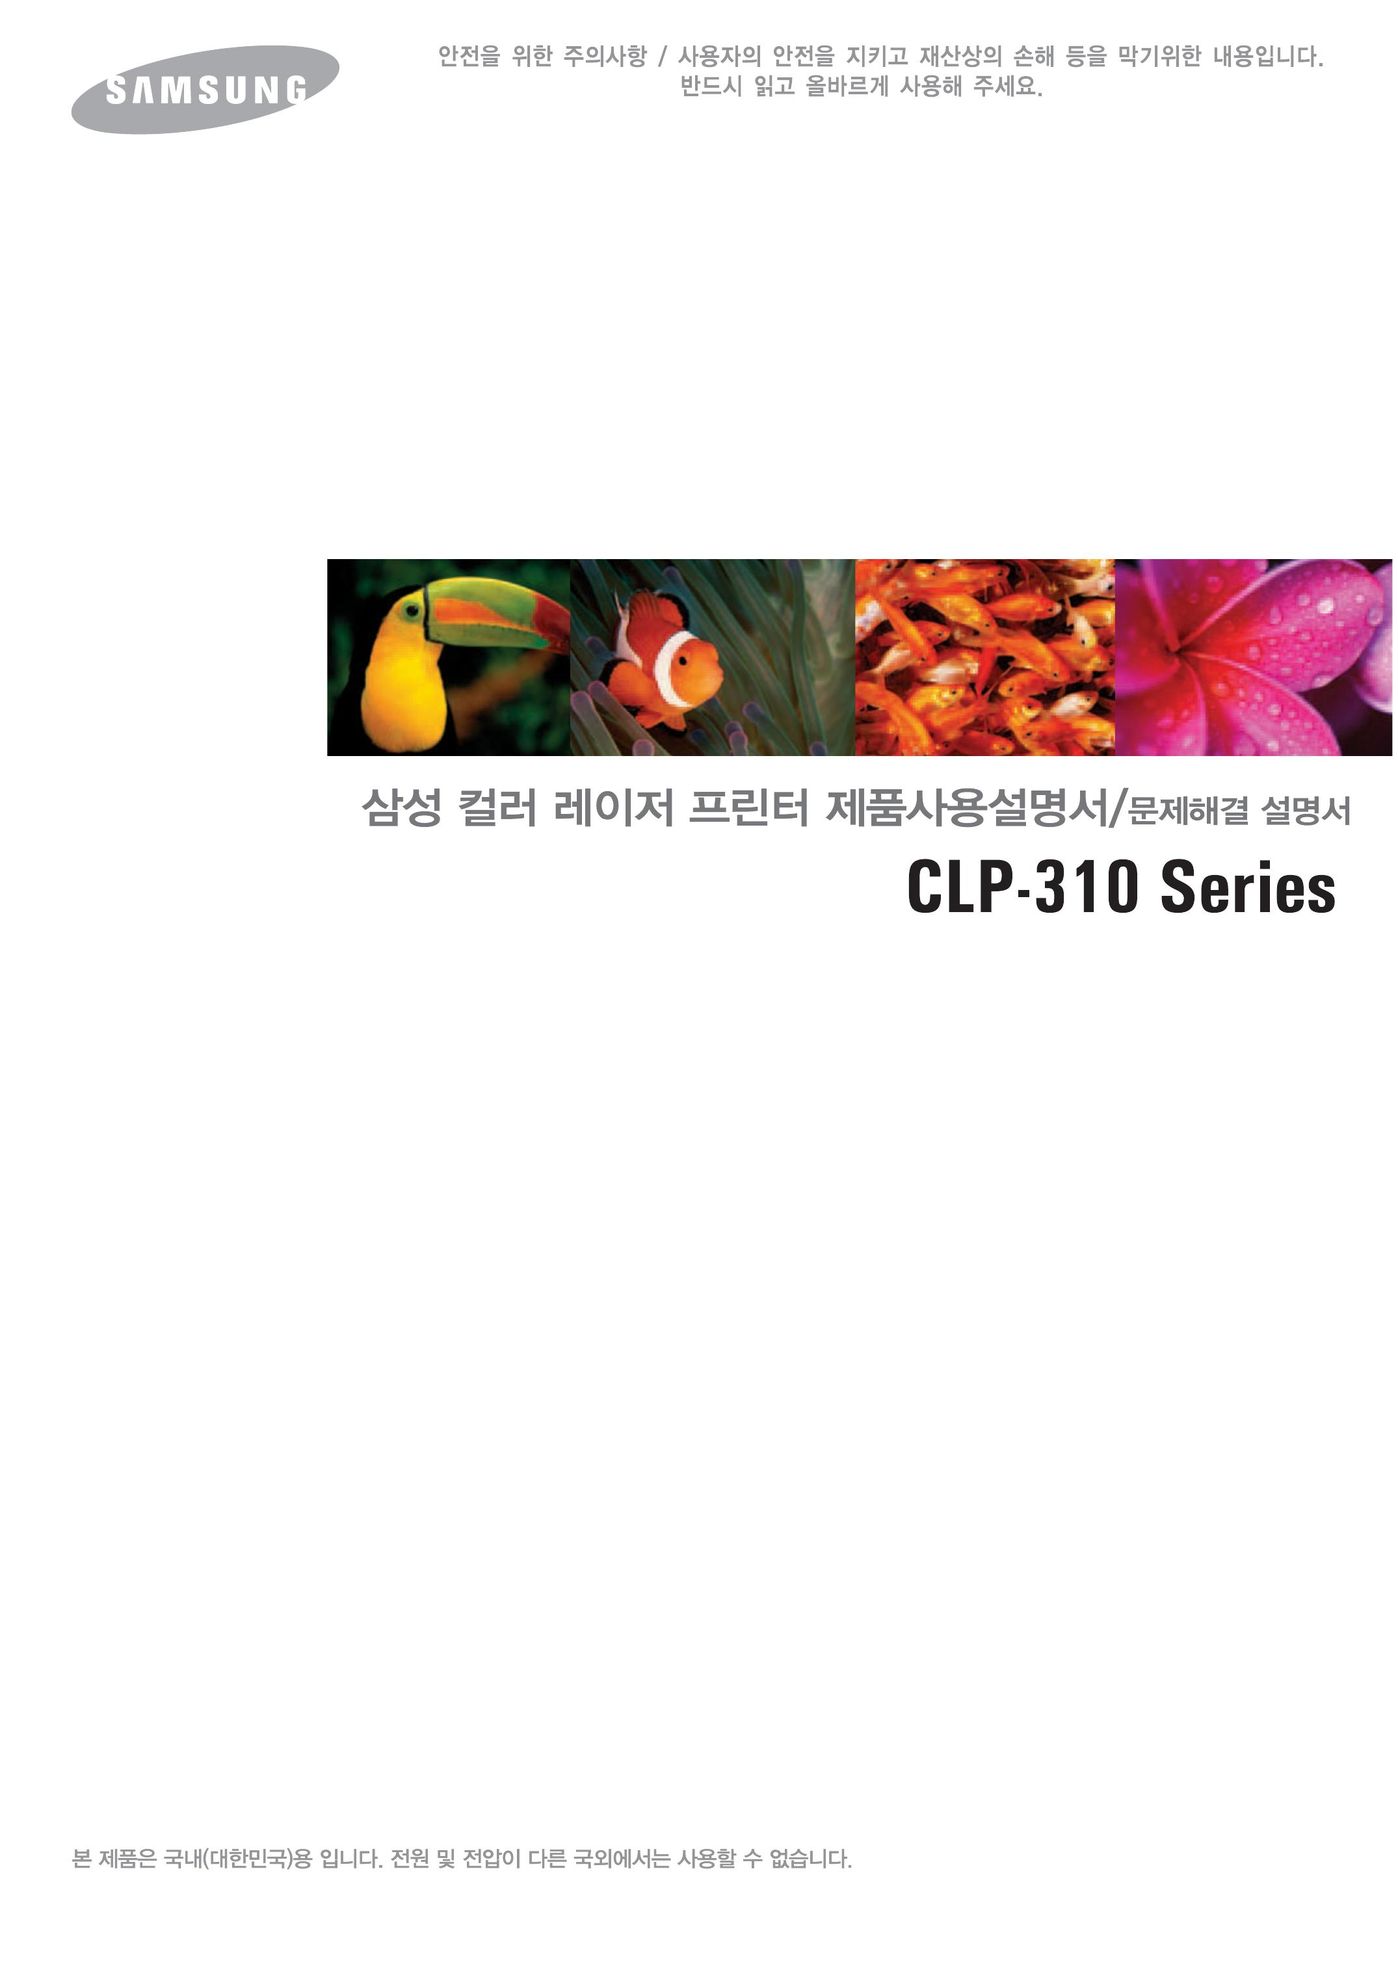 Samsung CLP-310NKG All in One Printer User Manual